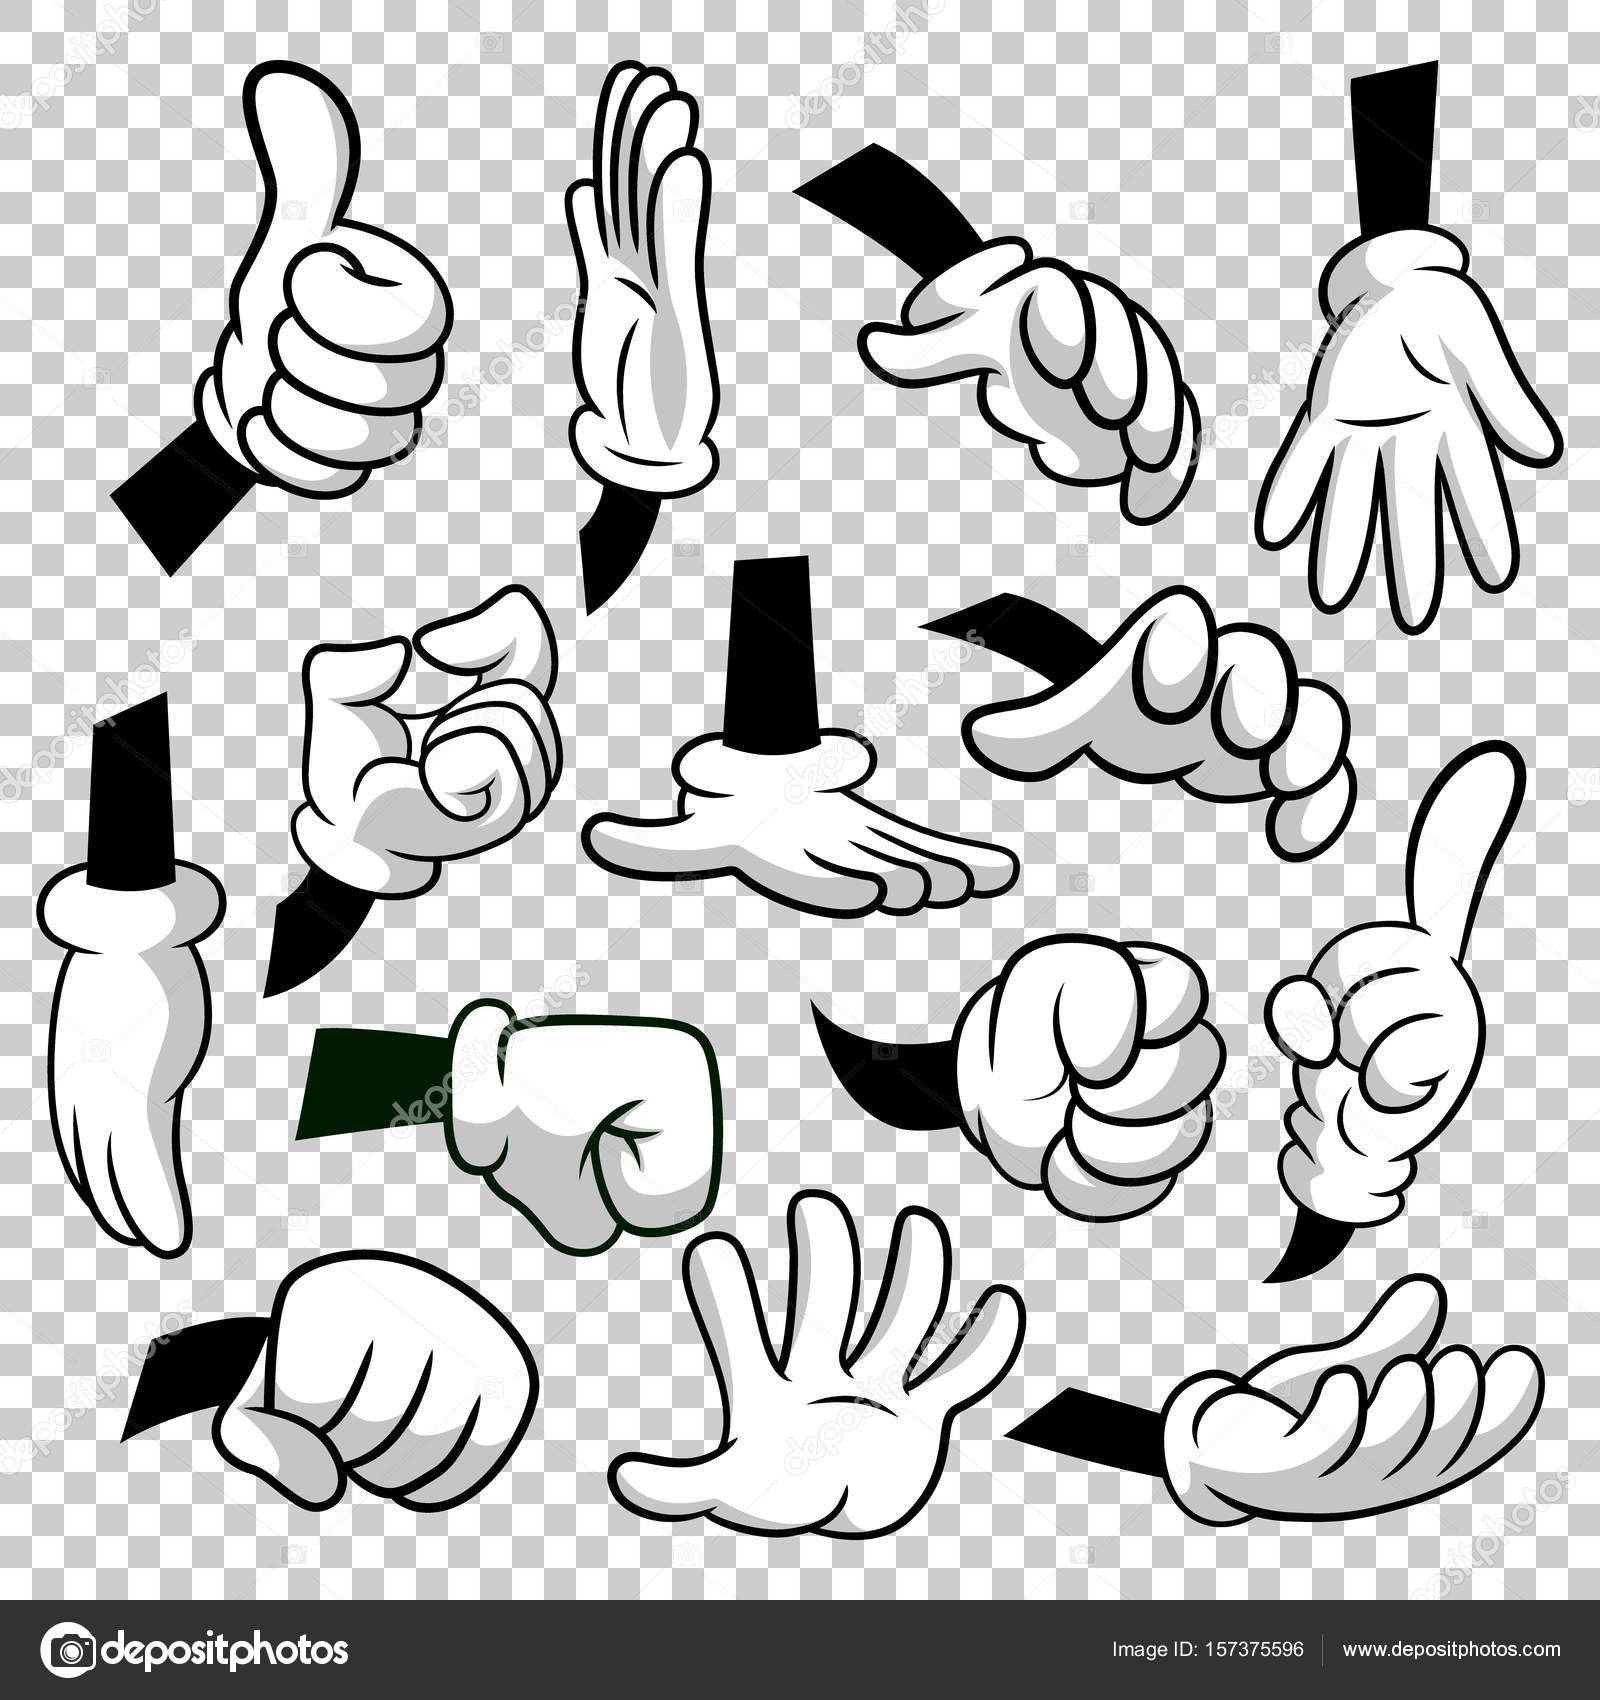 Cartoon hands with gloves icon set isolated on transparent background ...